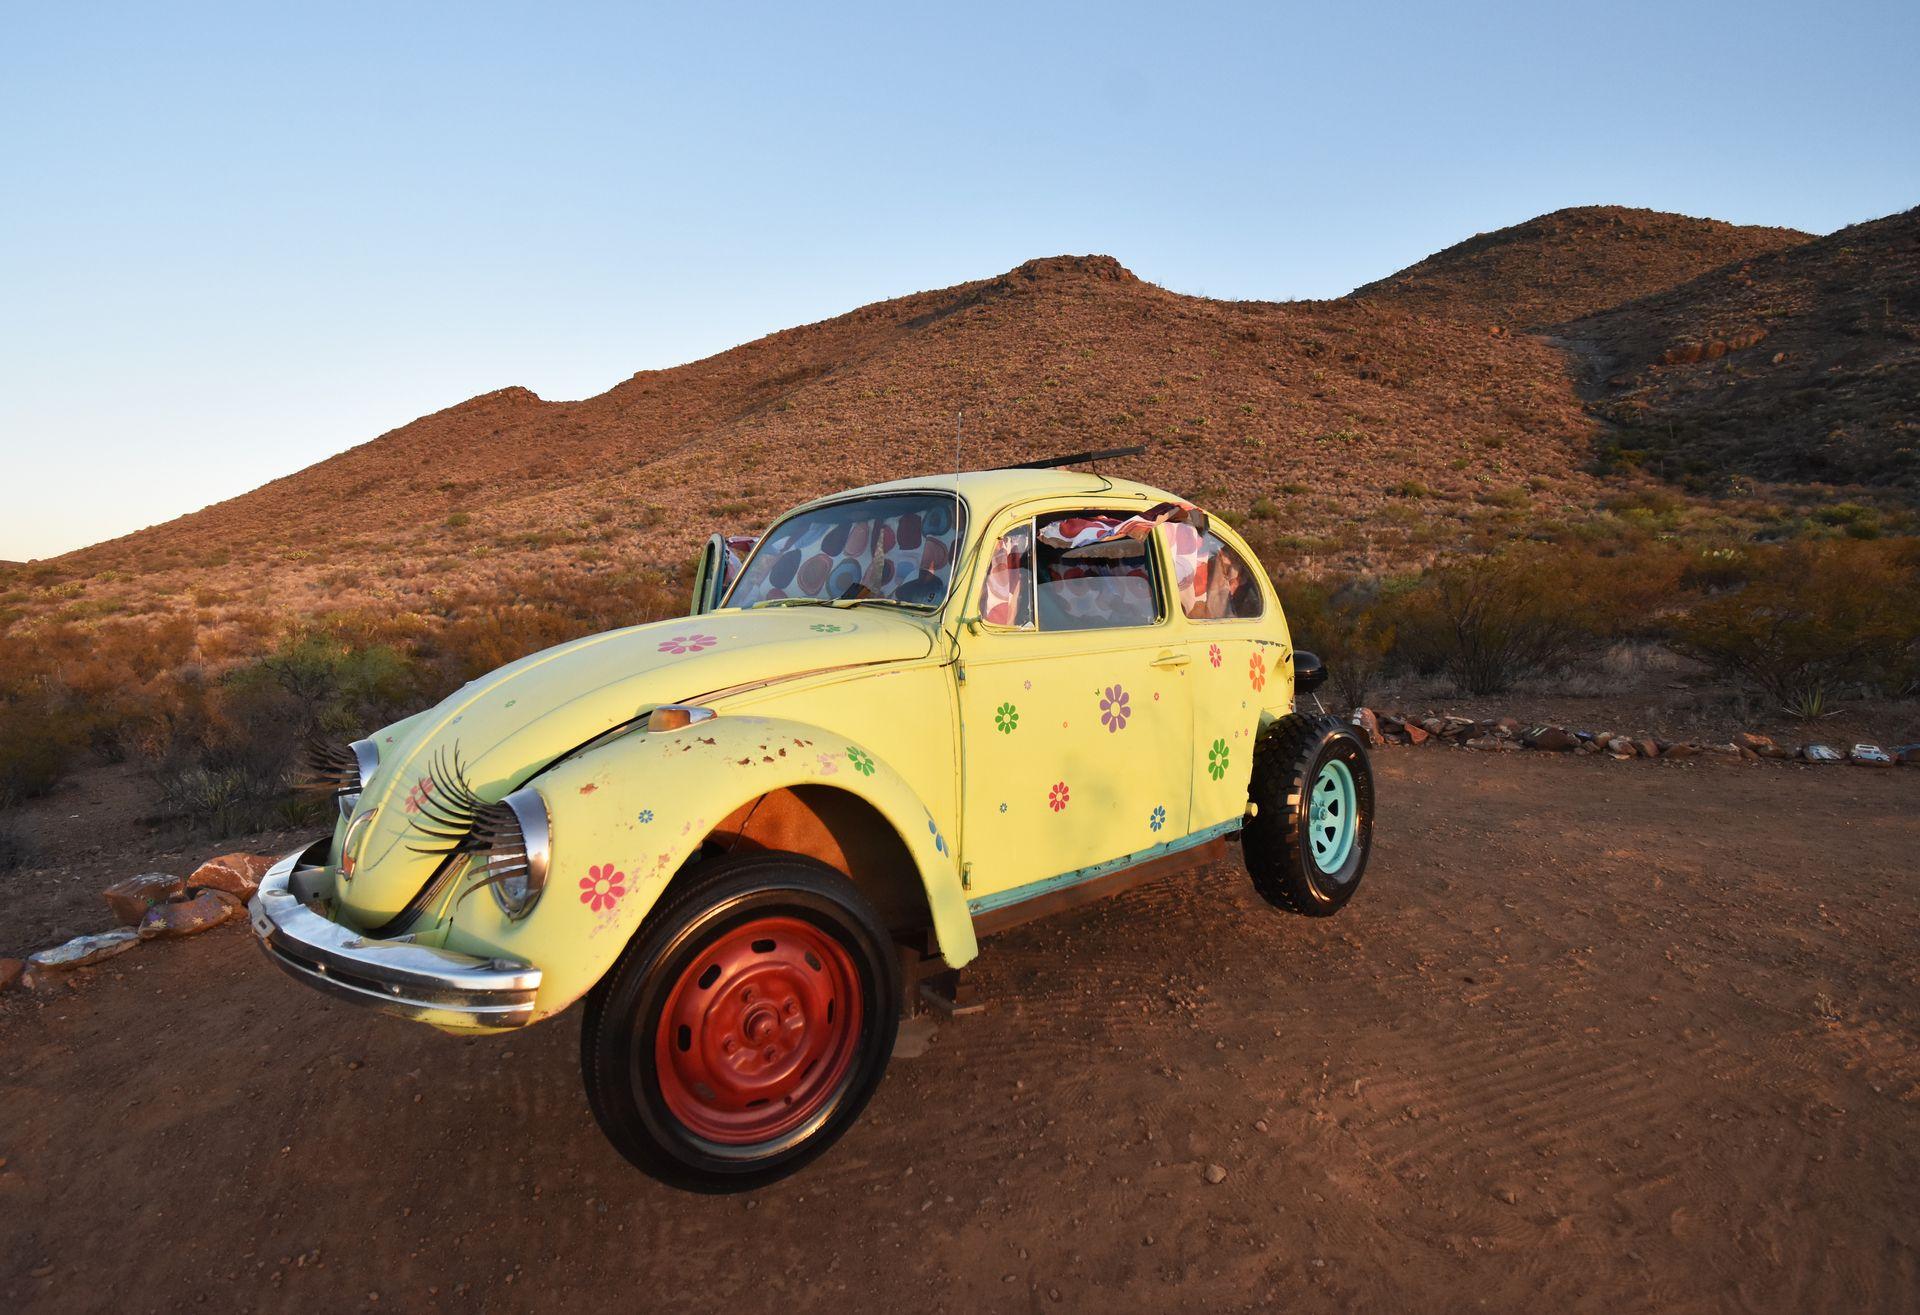 A yellow Volkswagen beetle elevated by a rod with mountains in the background. The bug has eyelashes and some colorful flowers on it.